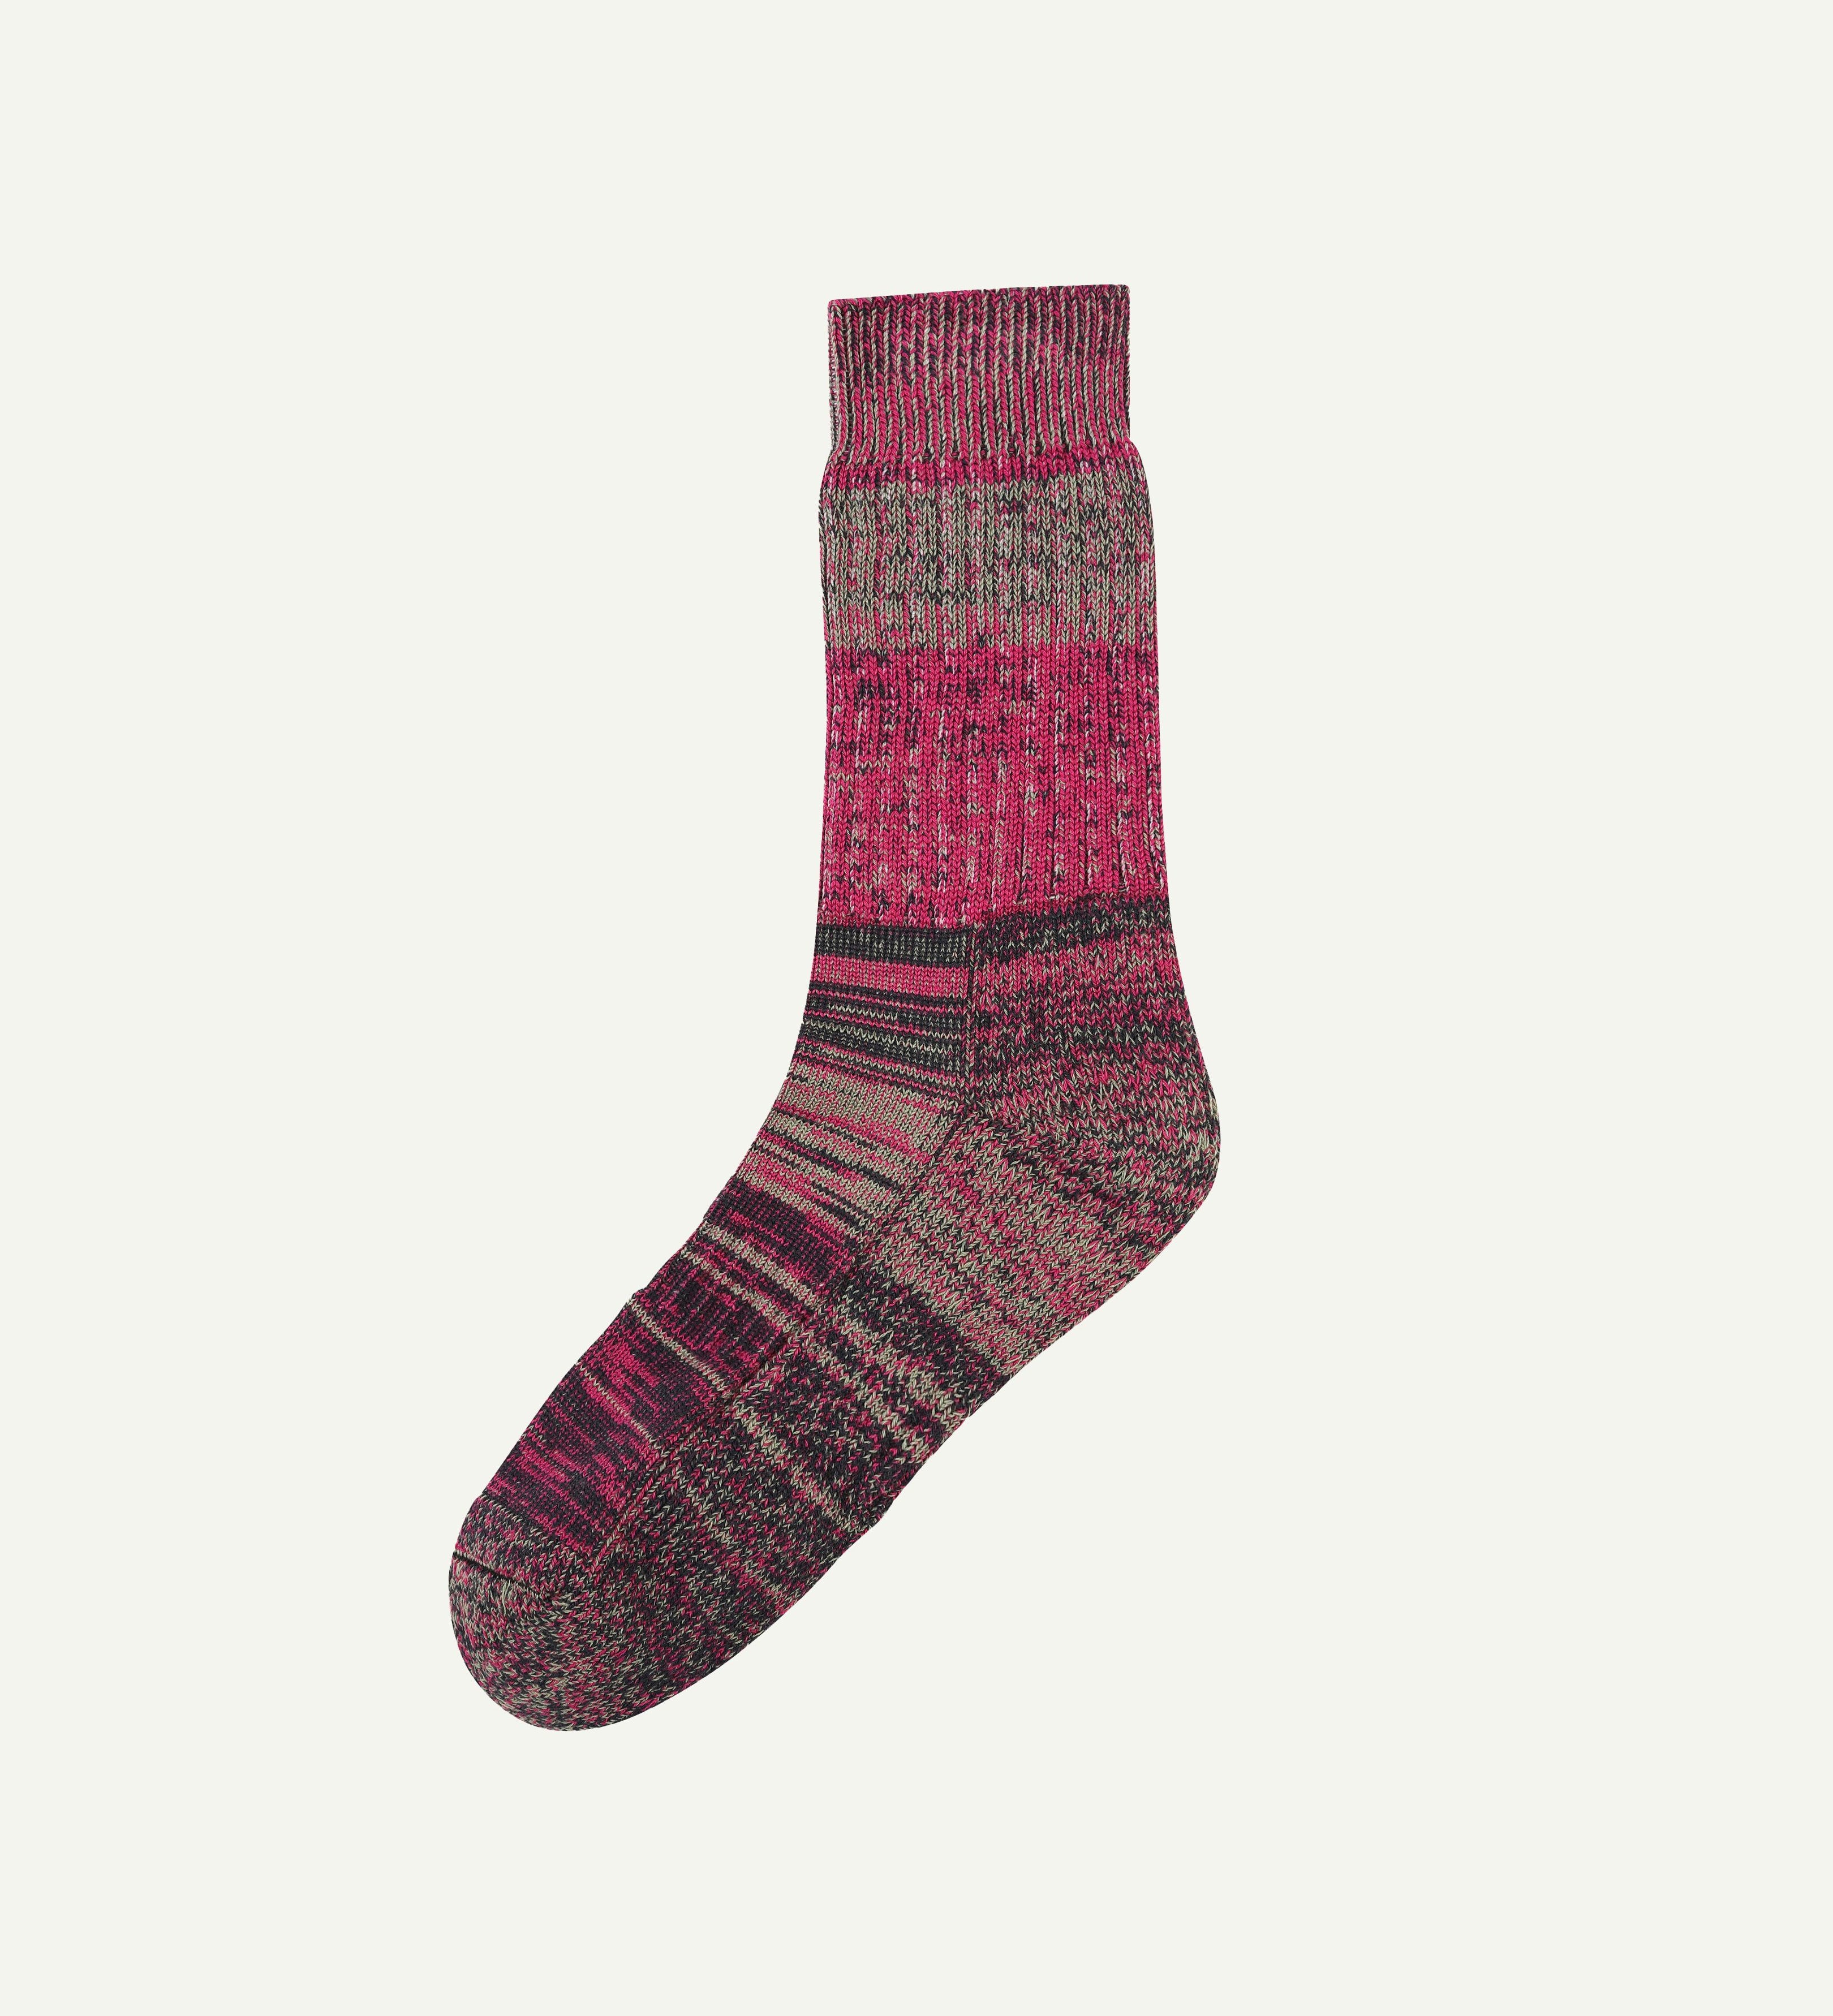 Flat view of Uskees 4006 violet mix organic cotton sock, showing different bands of colour.